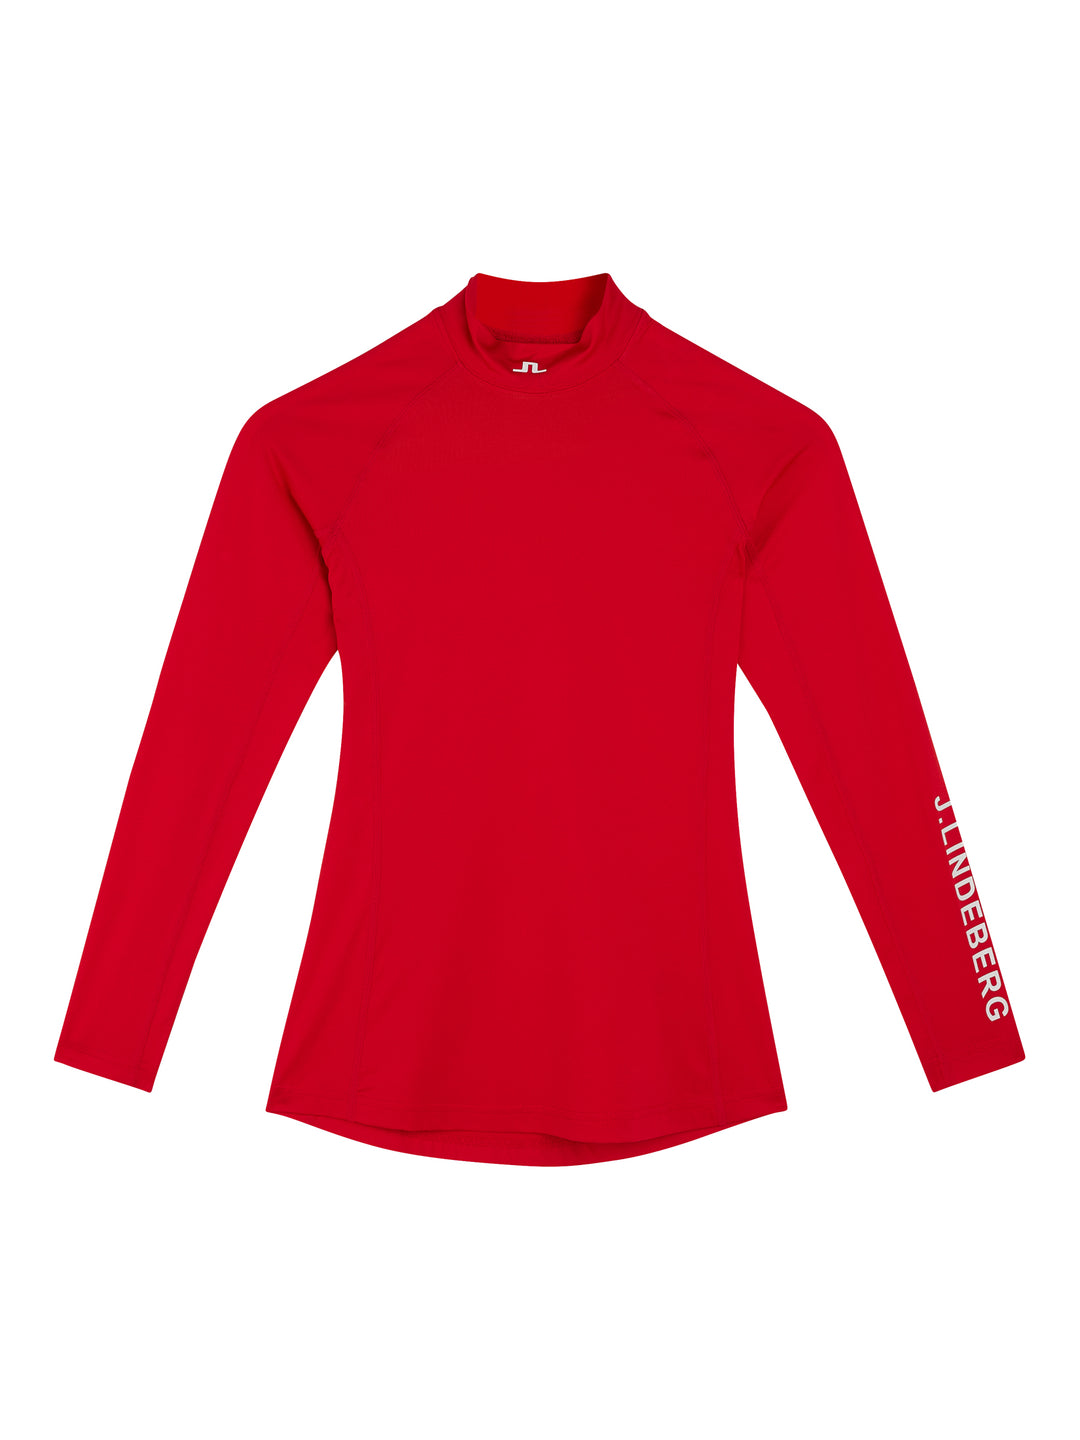 J.Lindeberg Womens Asa Soft Compression Top - FIERY RED